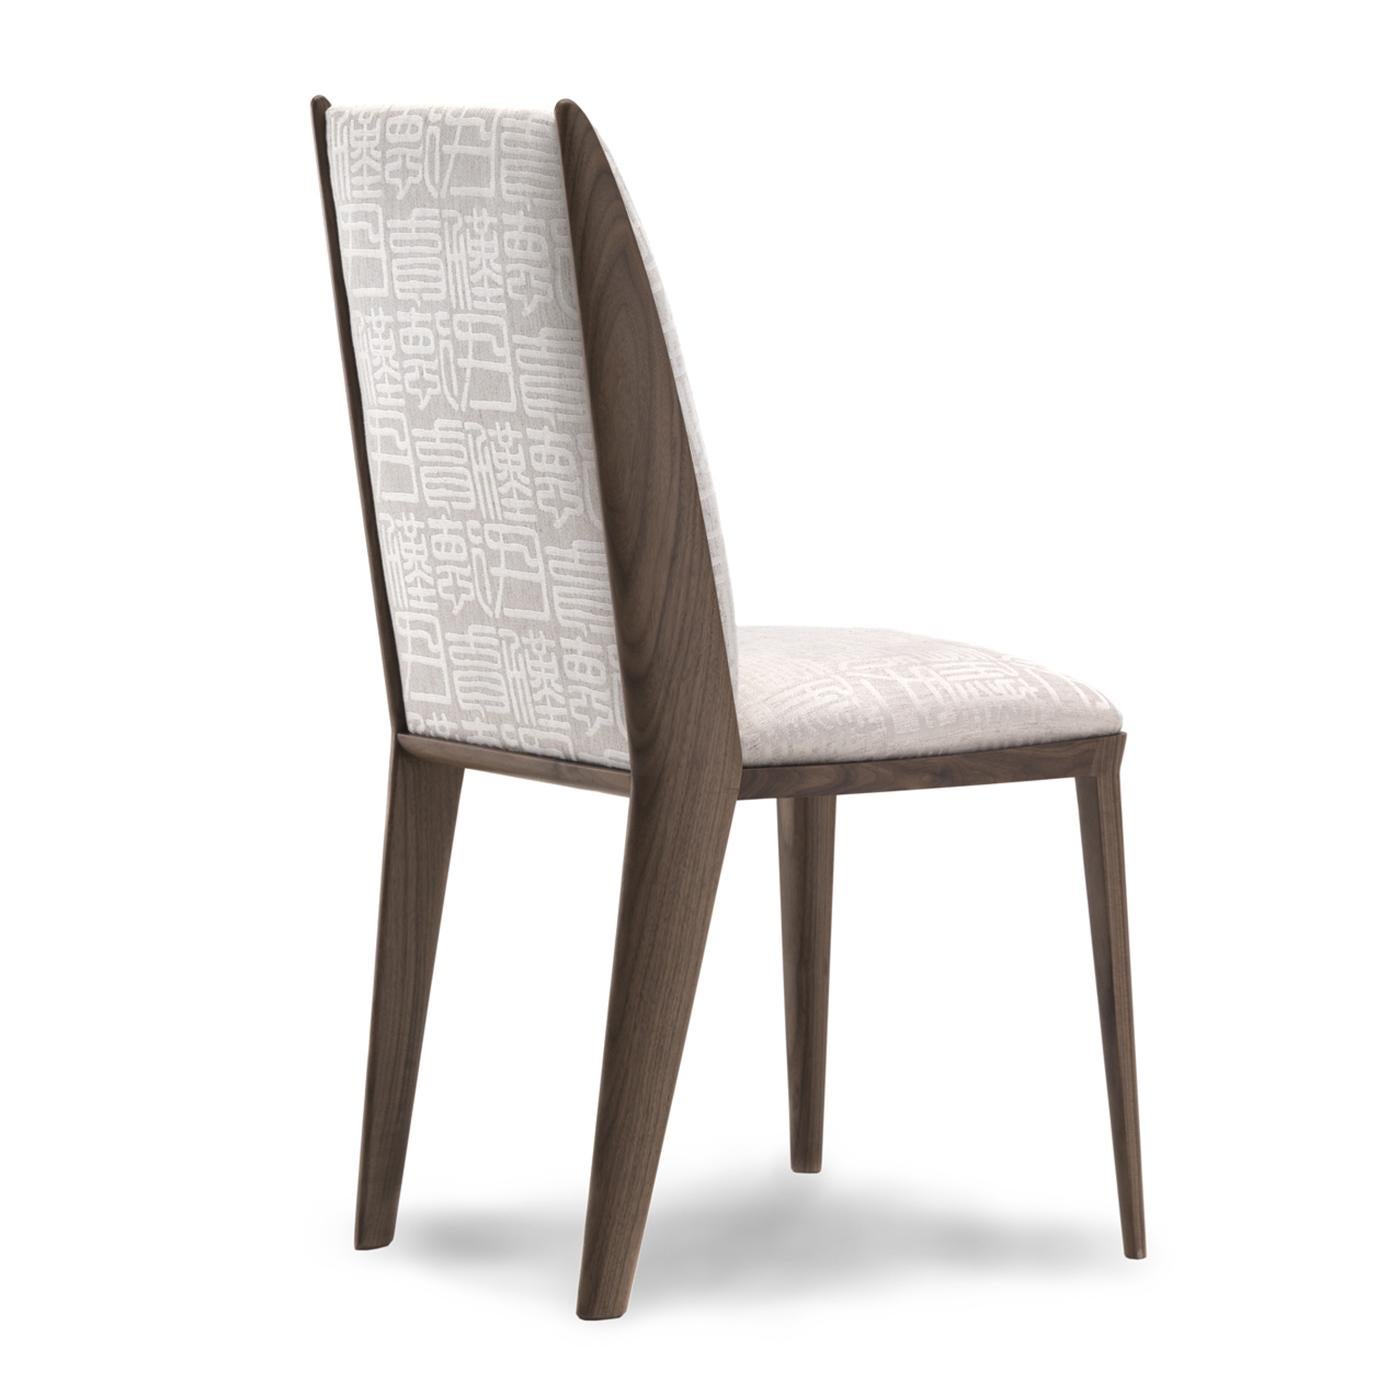 This sleek and elegant chair will ideally surround a contemporary-style table in a refined dining area, imbuing it with timeless sophistication. Handmade of Canaletto walnut, it features a clean silhouette with a softly padded seat and backrest,